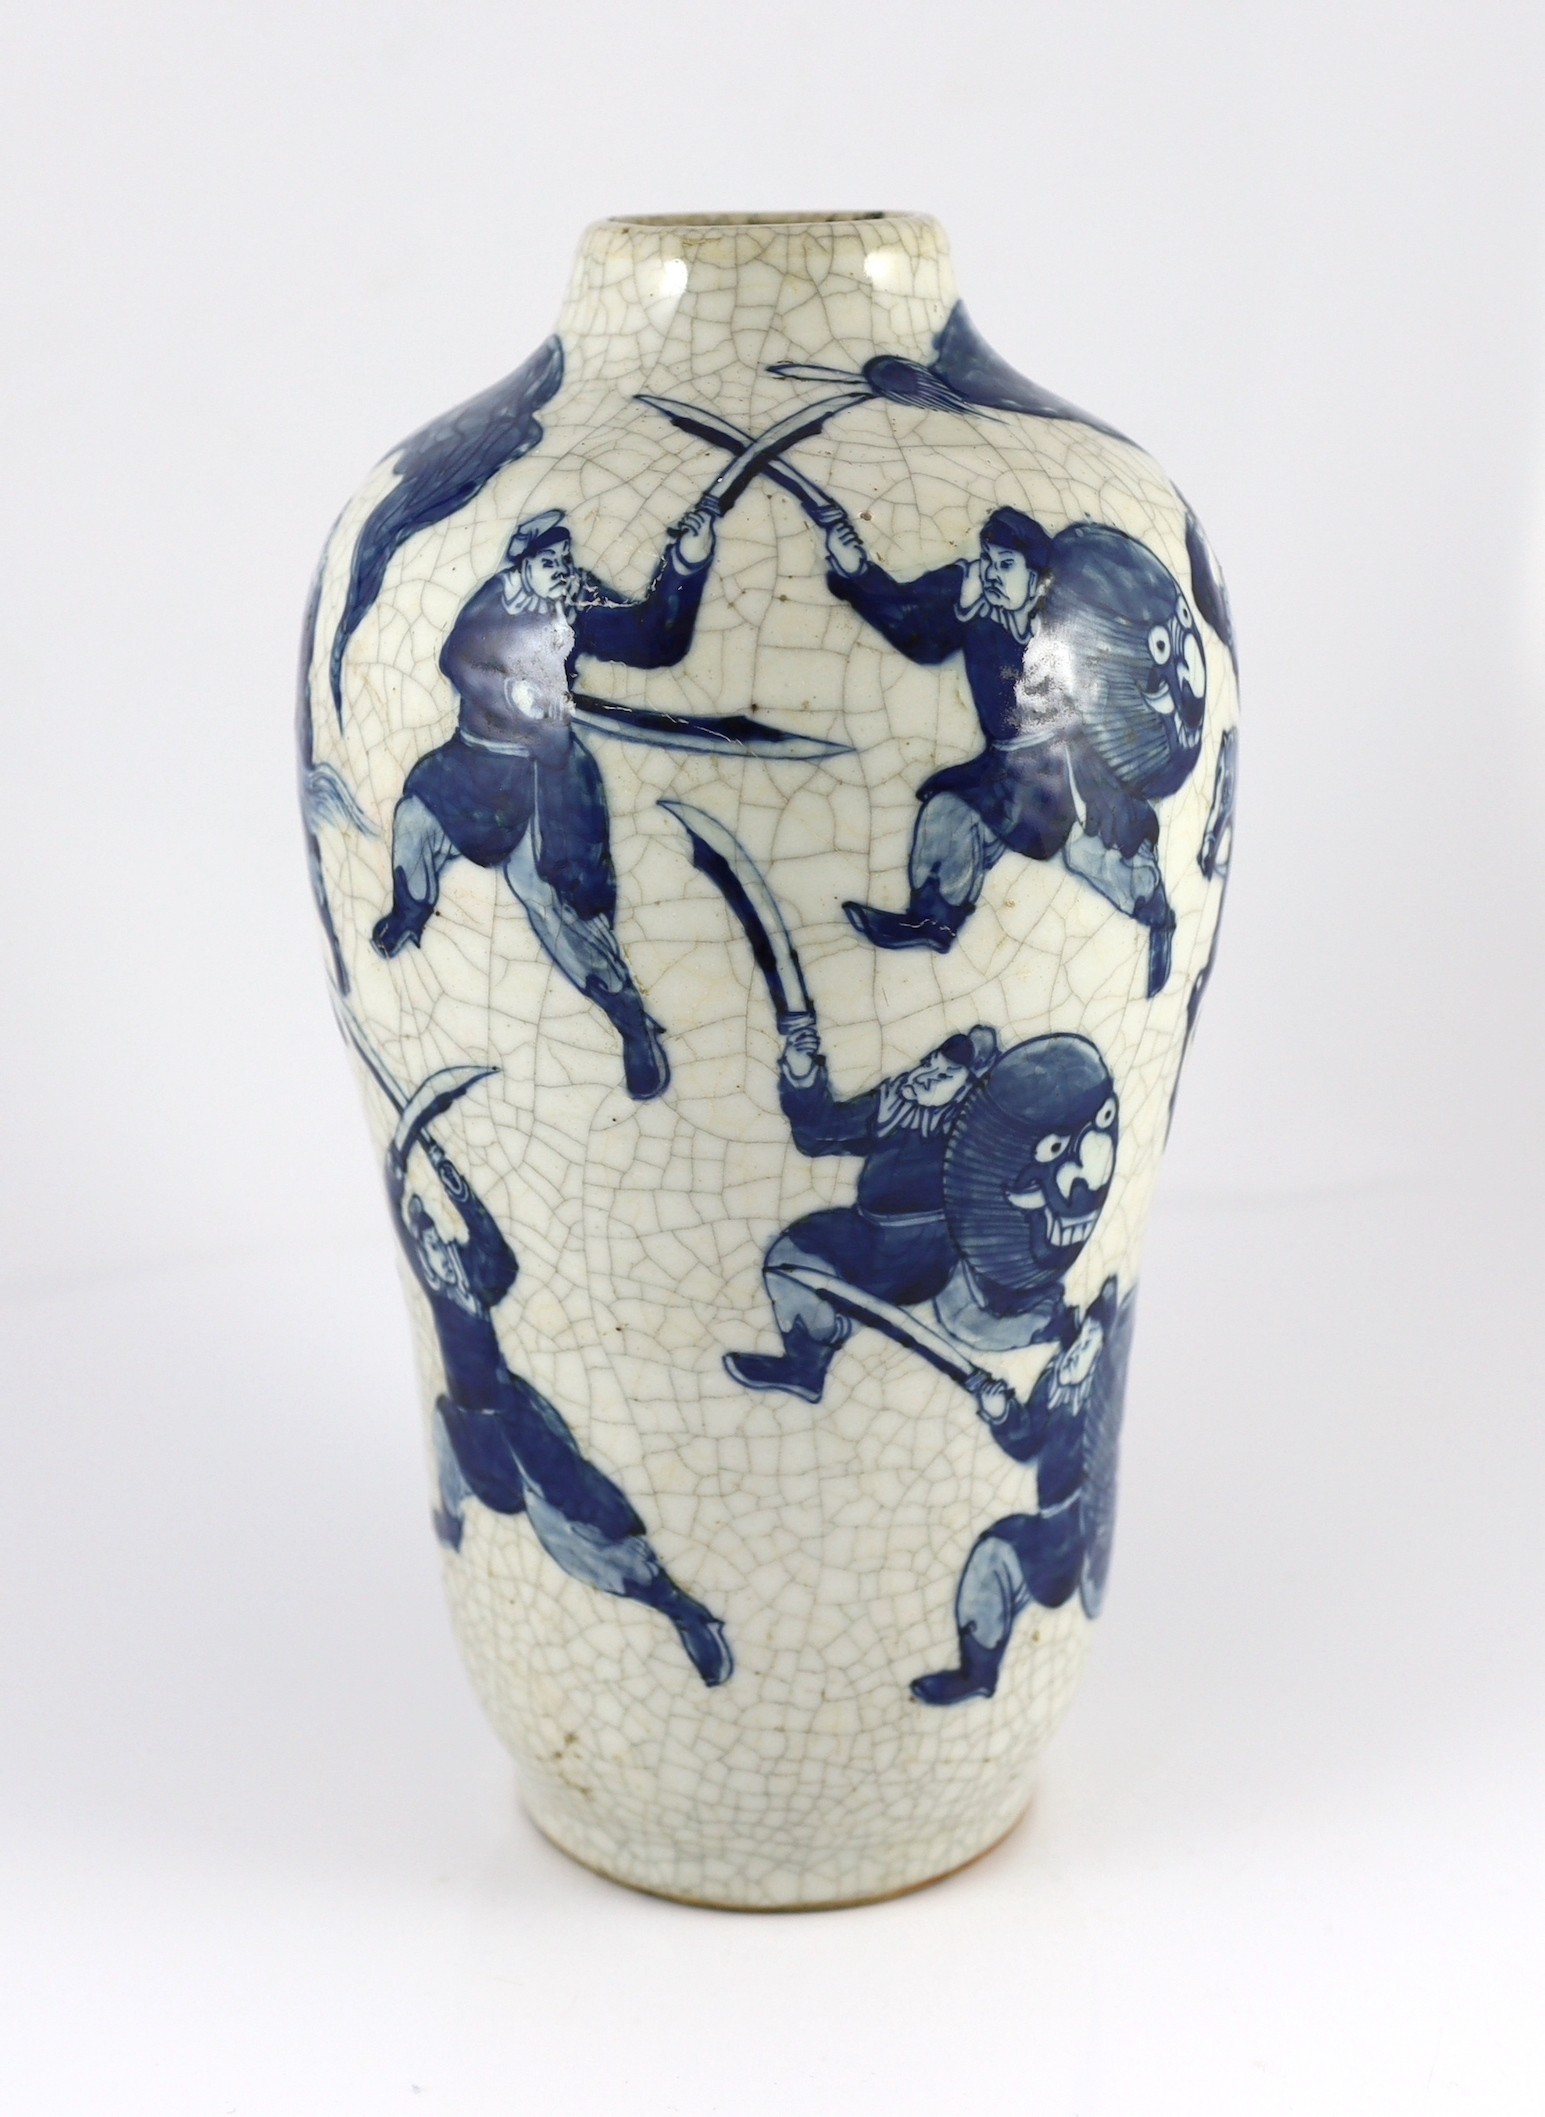 A Chinese blue and white crackle glaze ‘warriors’ vase, late 19th century, moulded and painted - Image 2 of 5